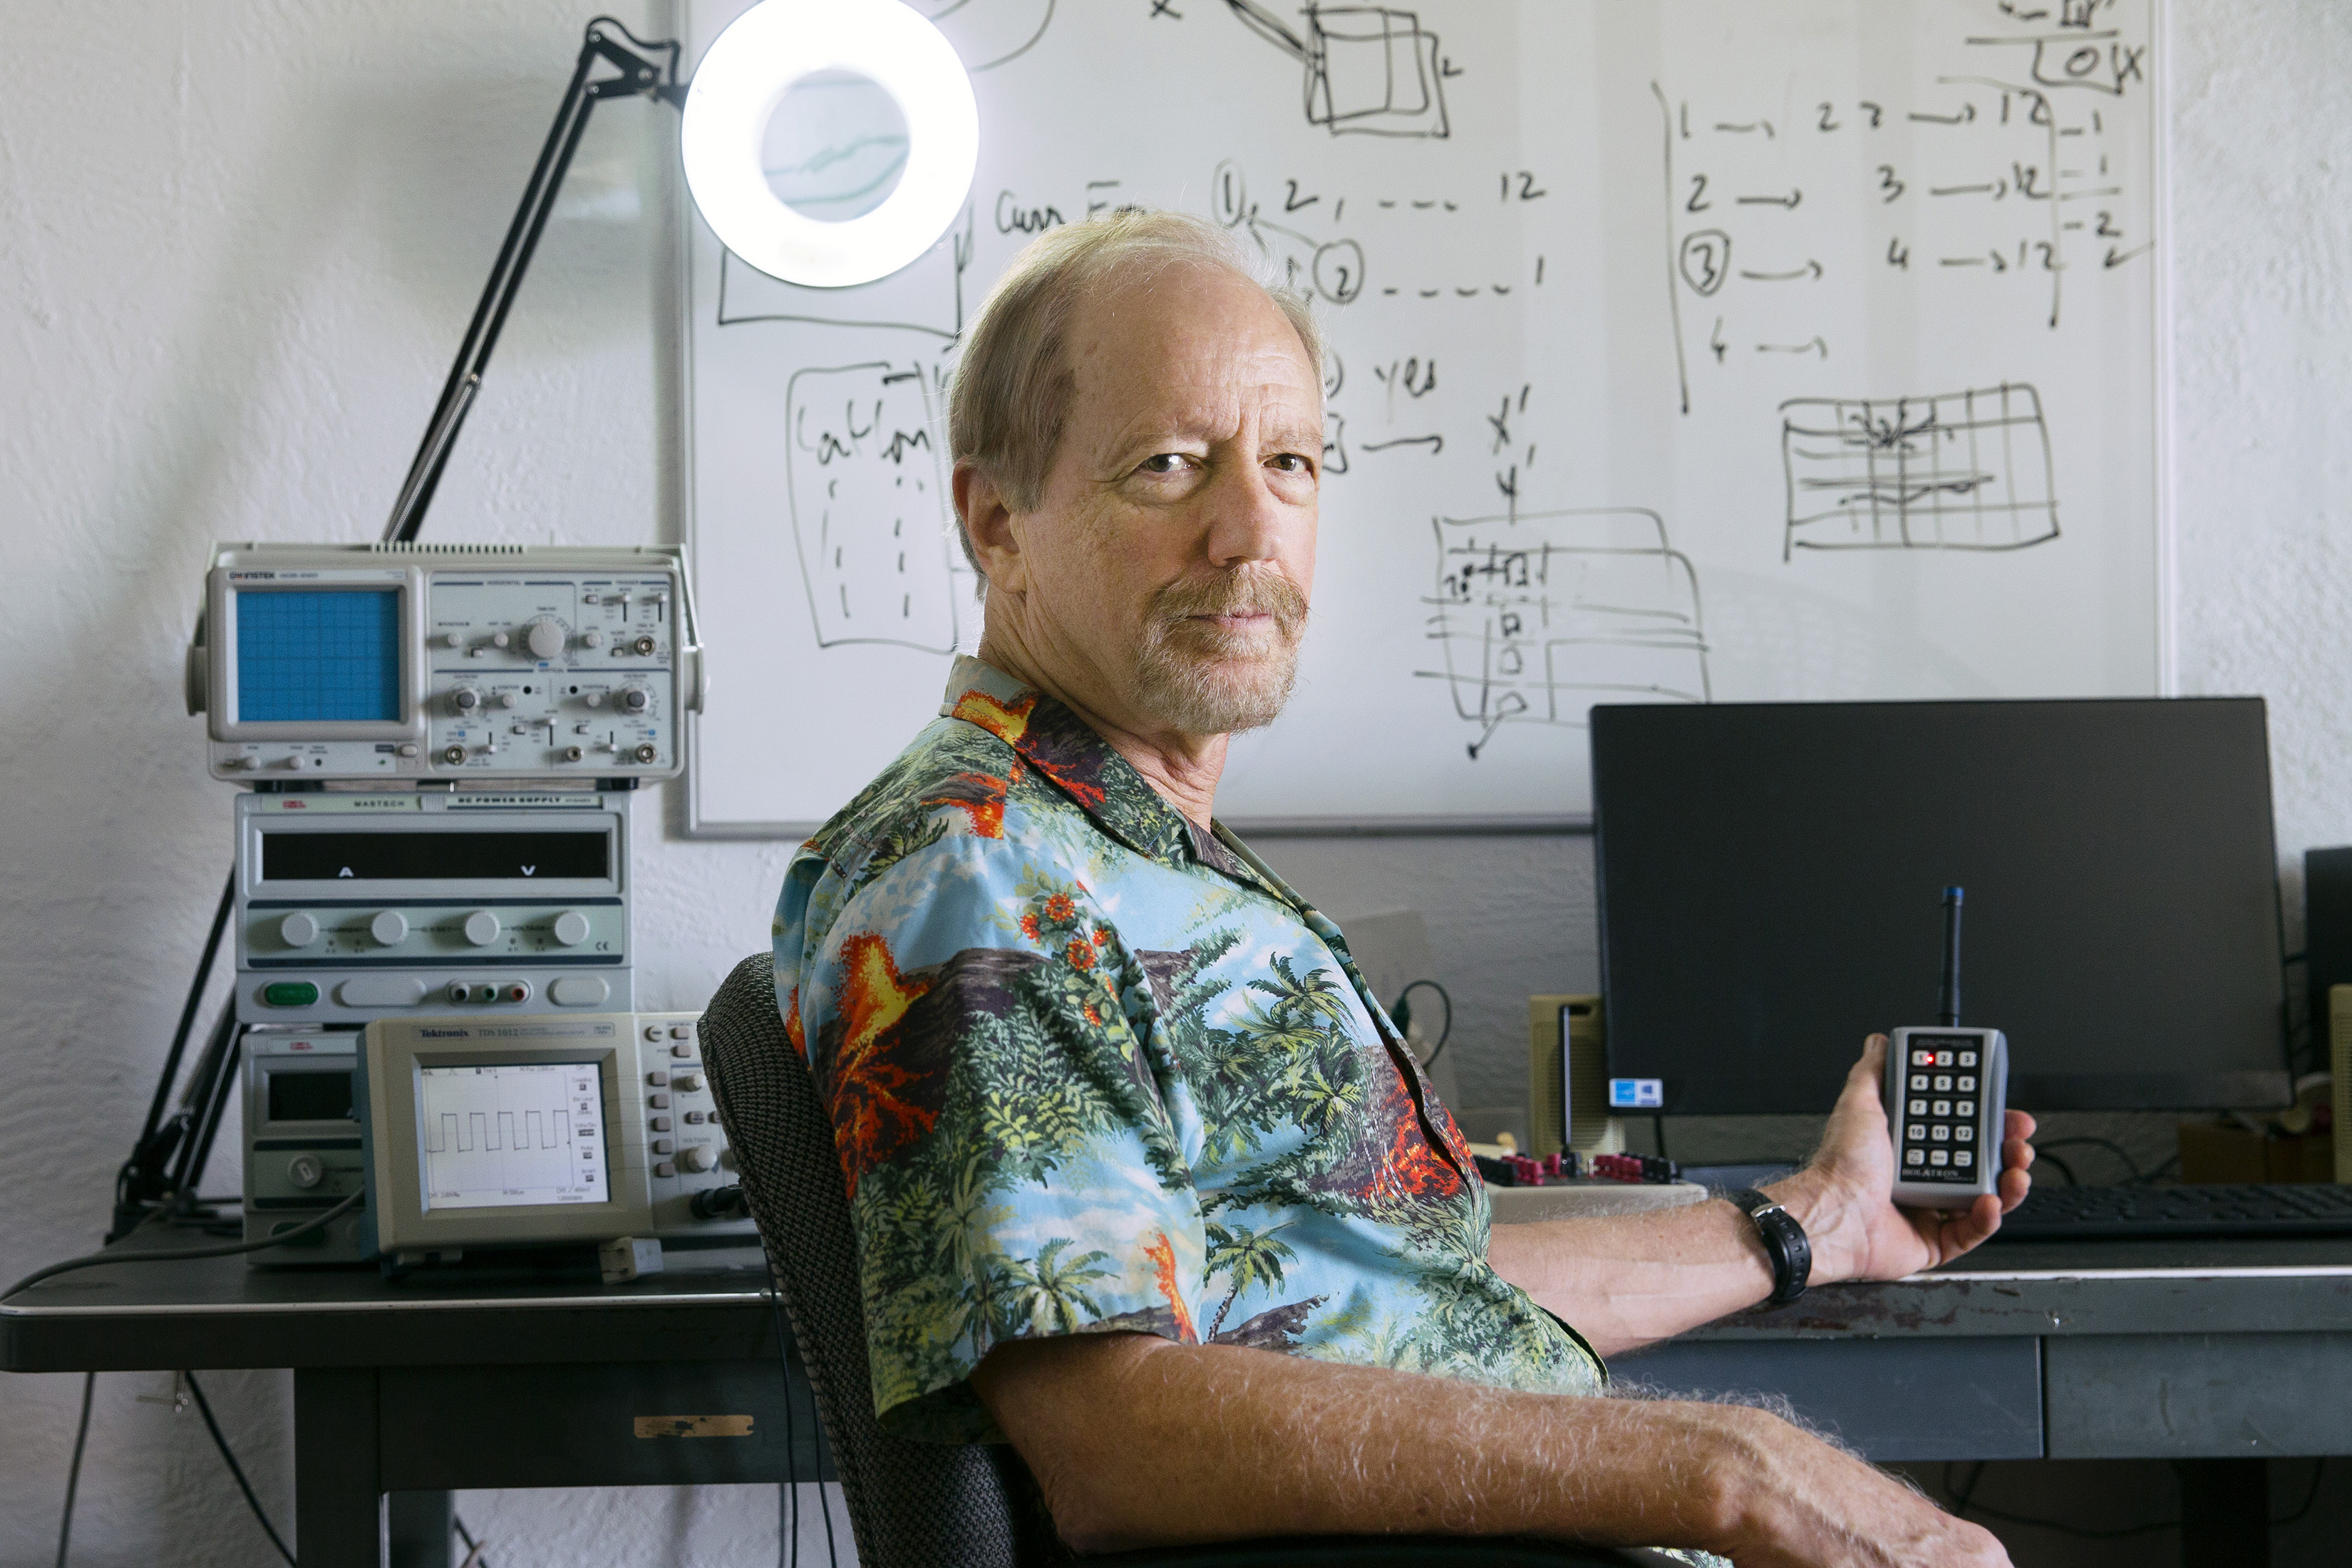 Charlie Holdaway is shown from elbows up, sitting at a desk and holding a keypad that has an antenna. Behind him on the left, machinery and a circular lamp can be seen. On the right, there is a computer screen; Behind him, there is a whiteboard with some numbers and figures visible.